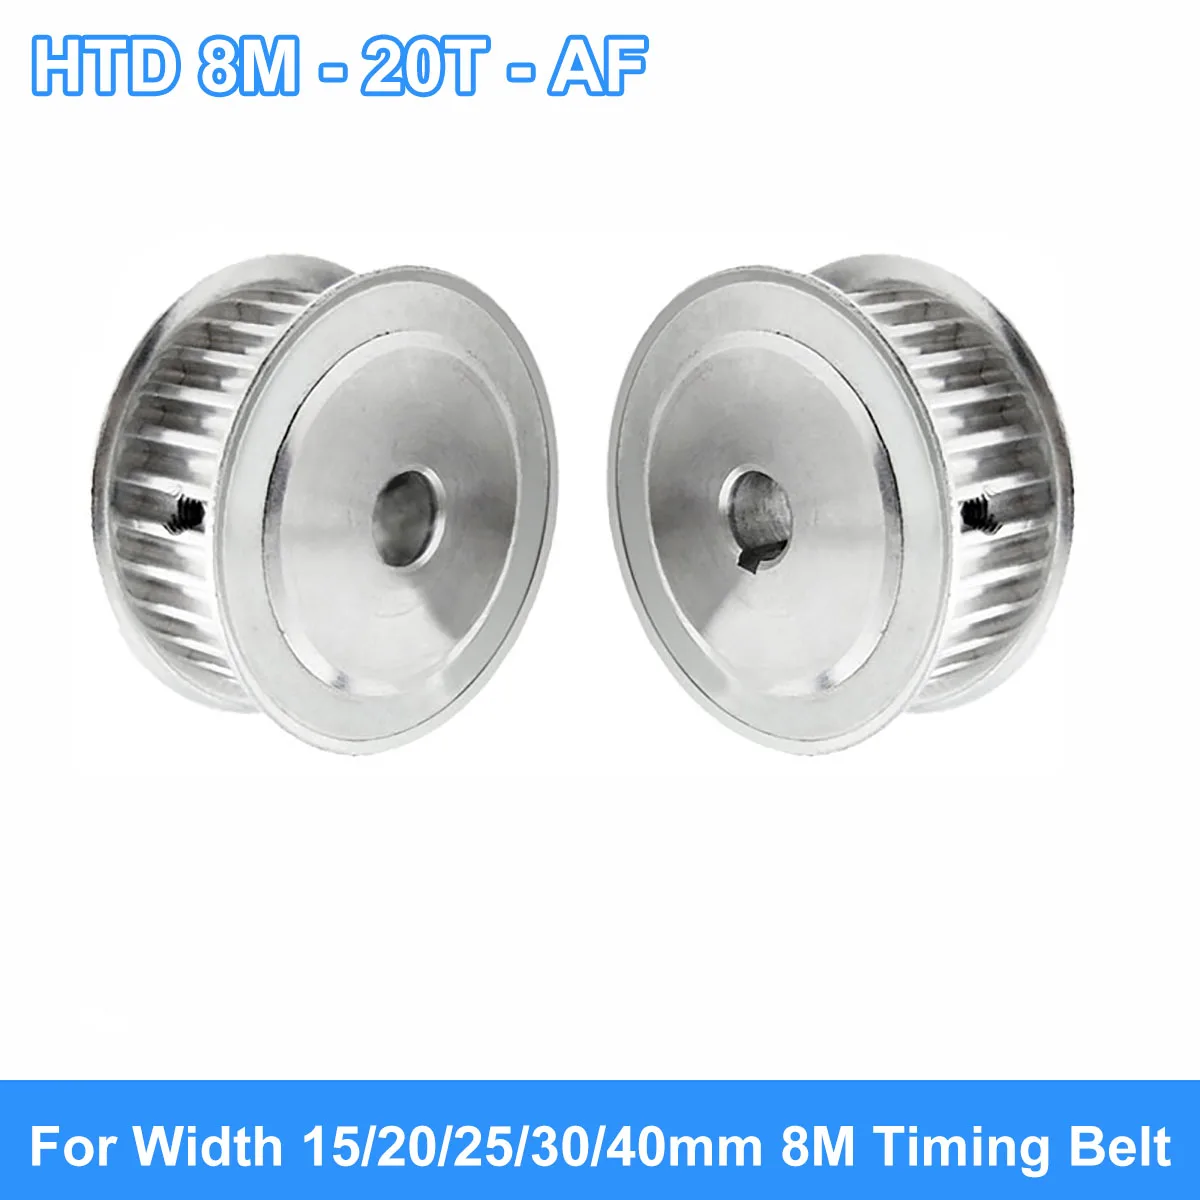 

HTD 8M 20Tooth Timing Pulley 8M-20T AF Synchronus Pulley Keyway Bore 8-30mm For Width 15/20/25/30/40mm 8M Timing Belt